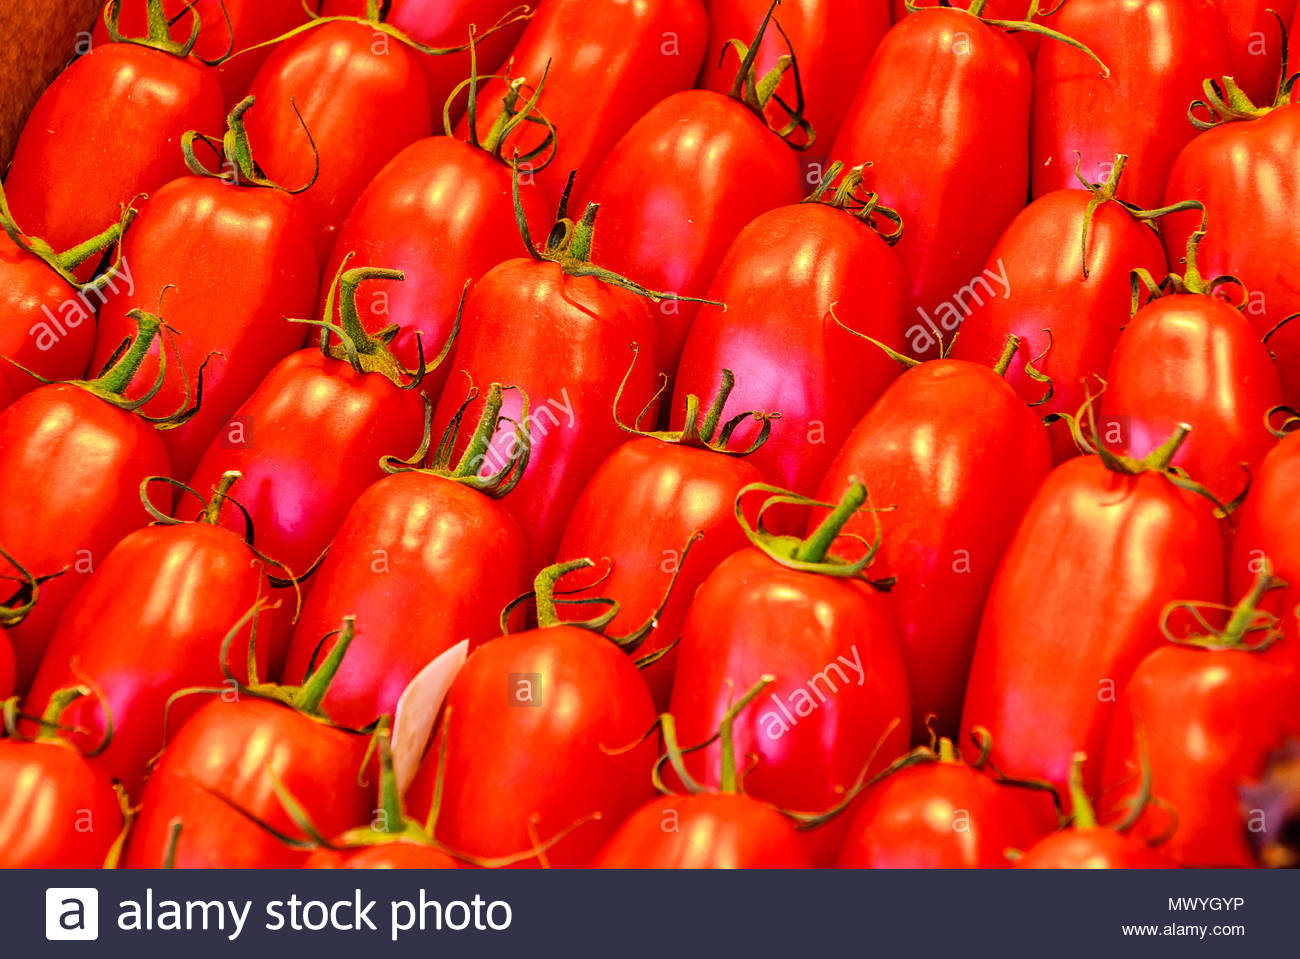 Background Of Roma Tomatoes Plum Tomato Also Known As A